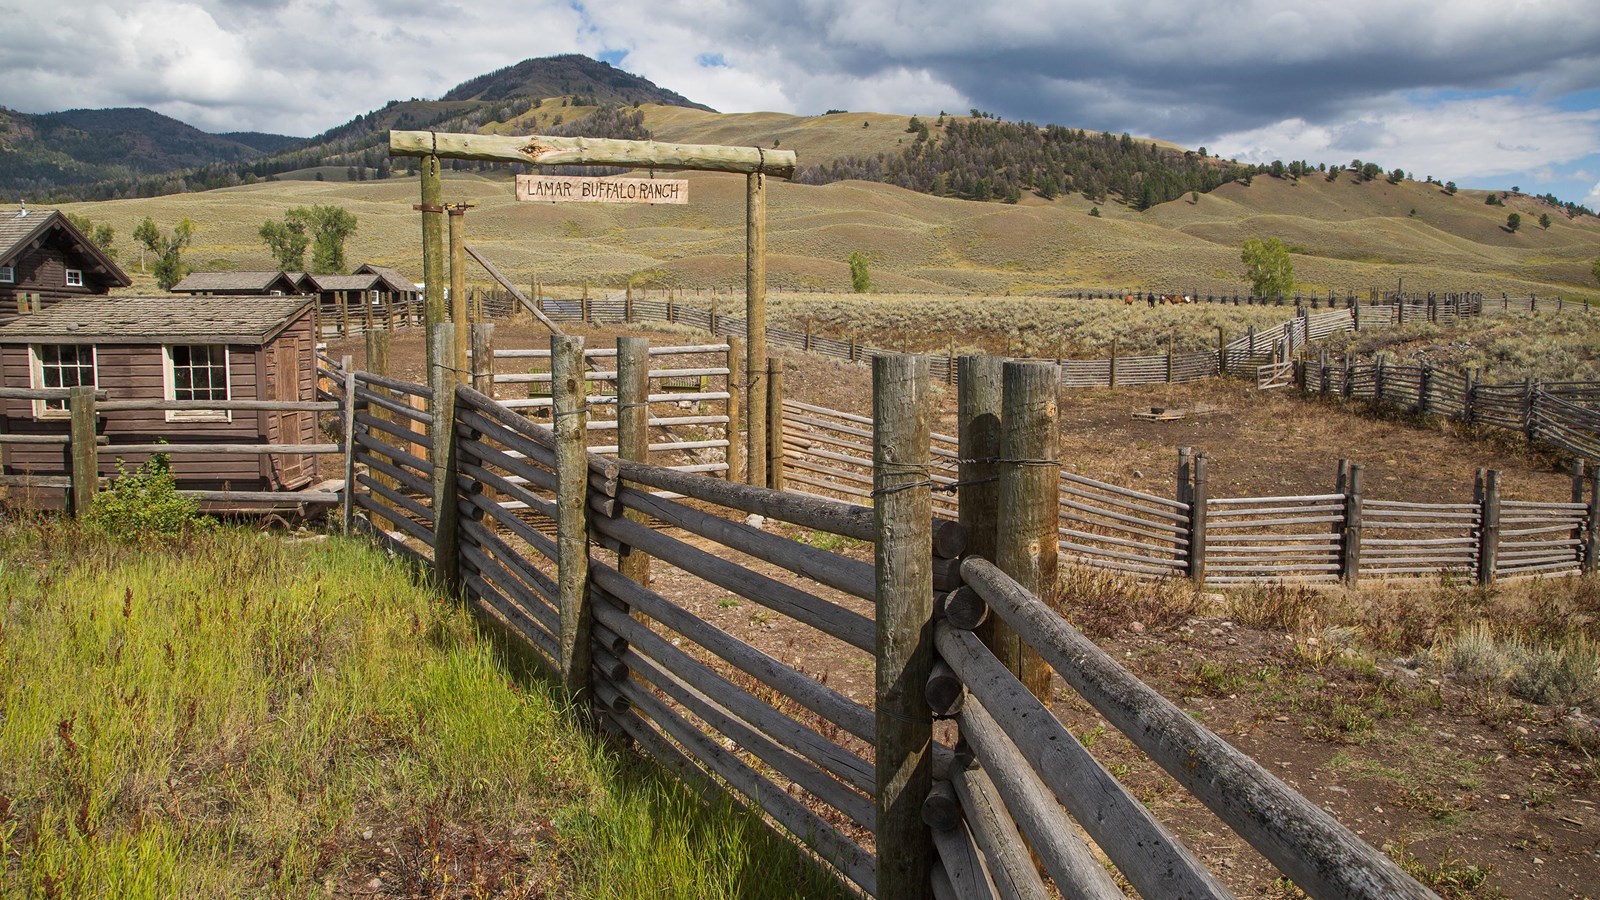 A rustic wooden fence and corral with the sign Lamar Buffalo Ranch next to wooden buildings.